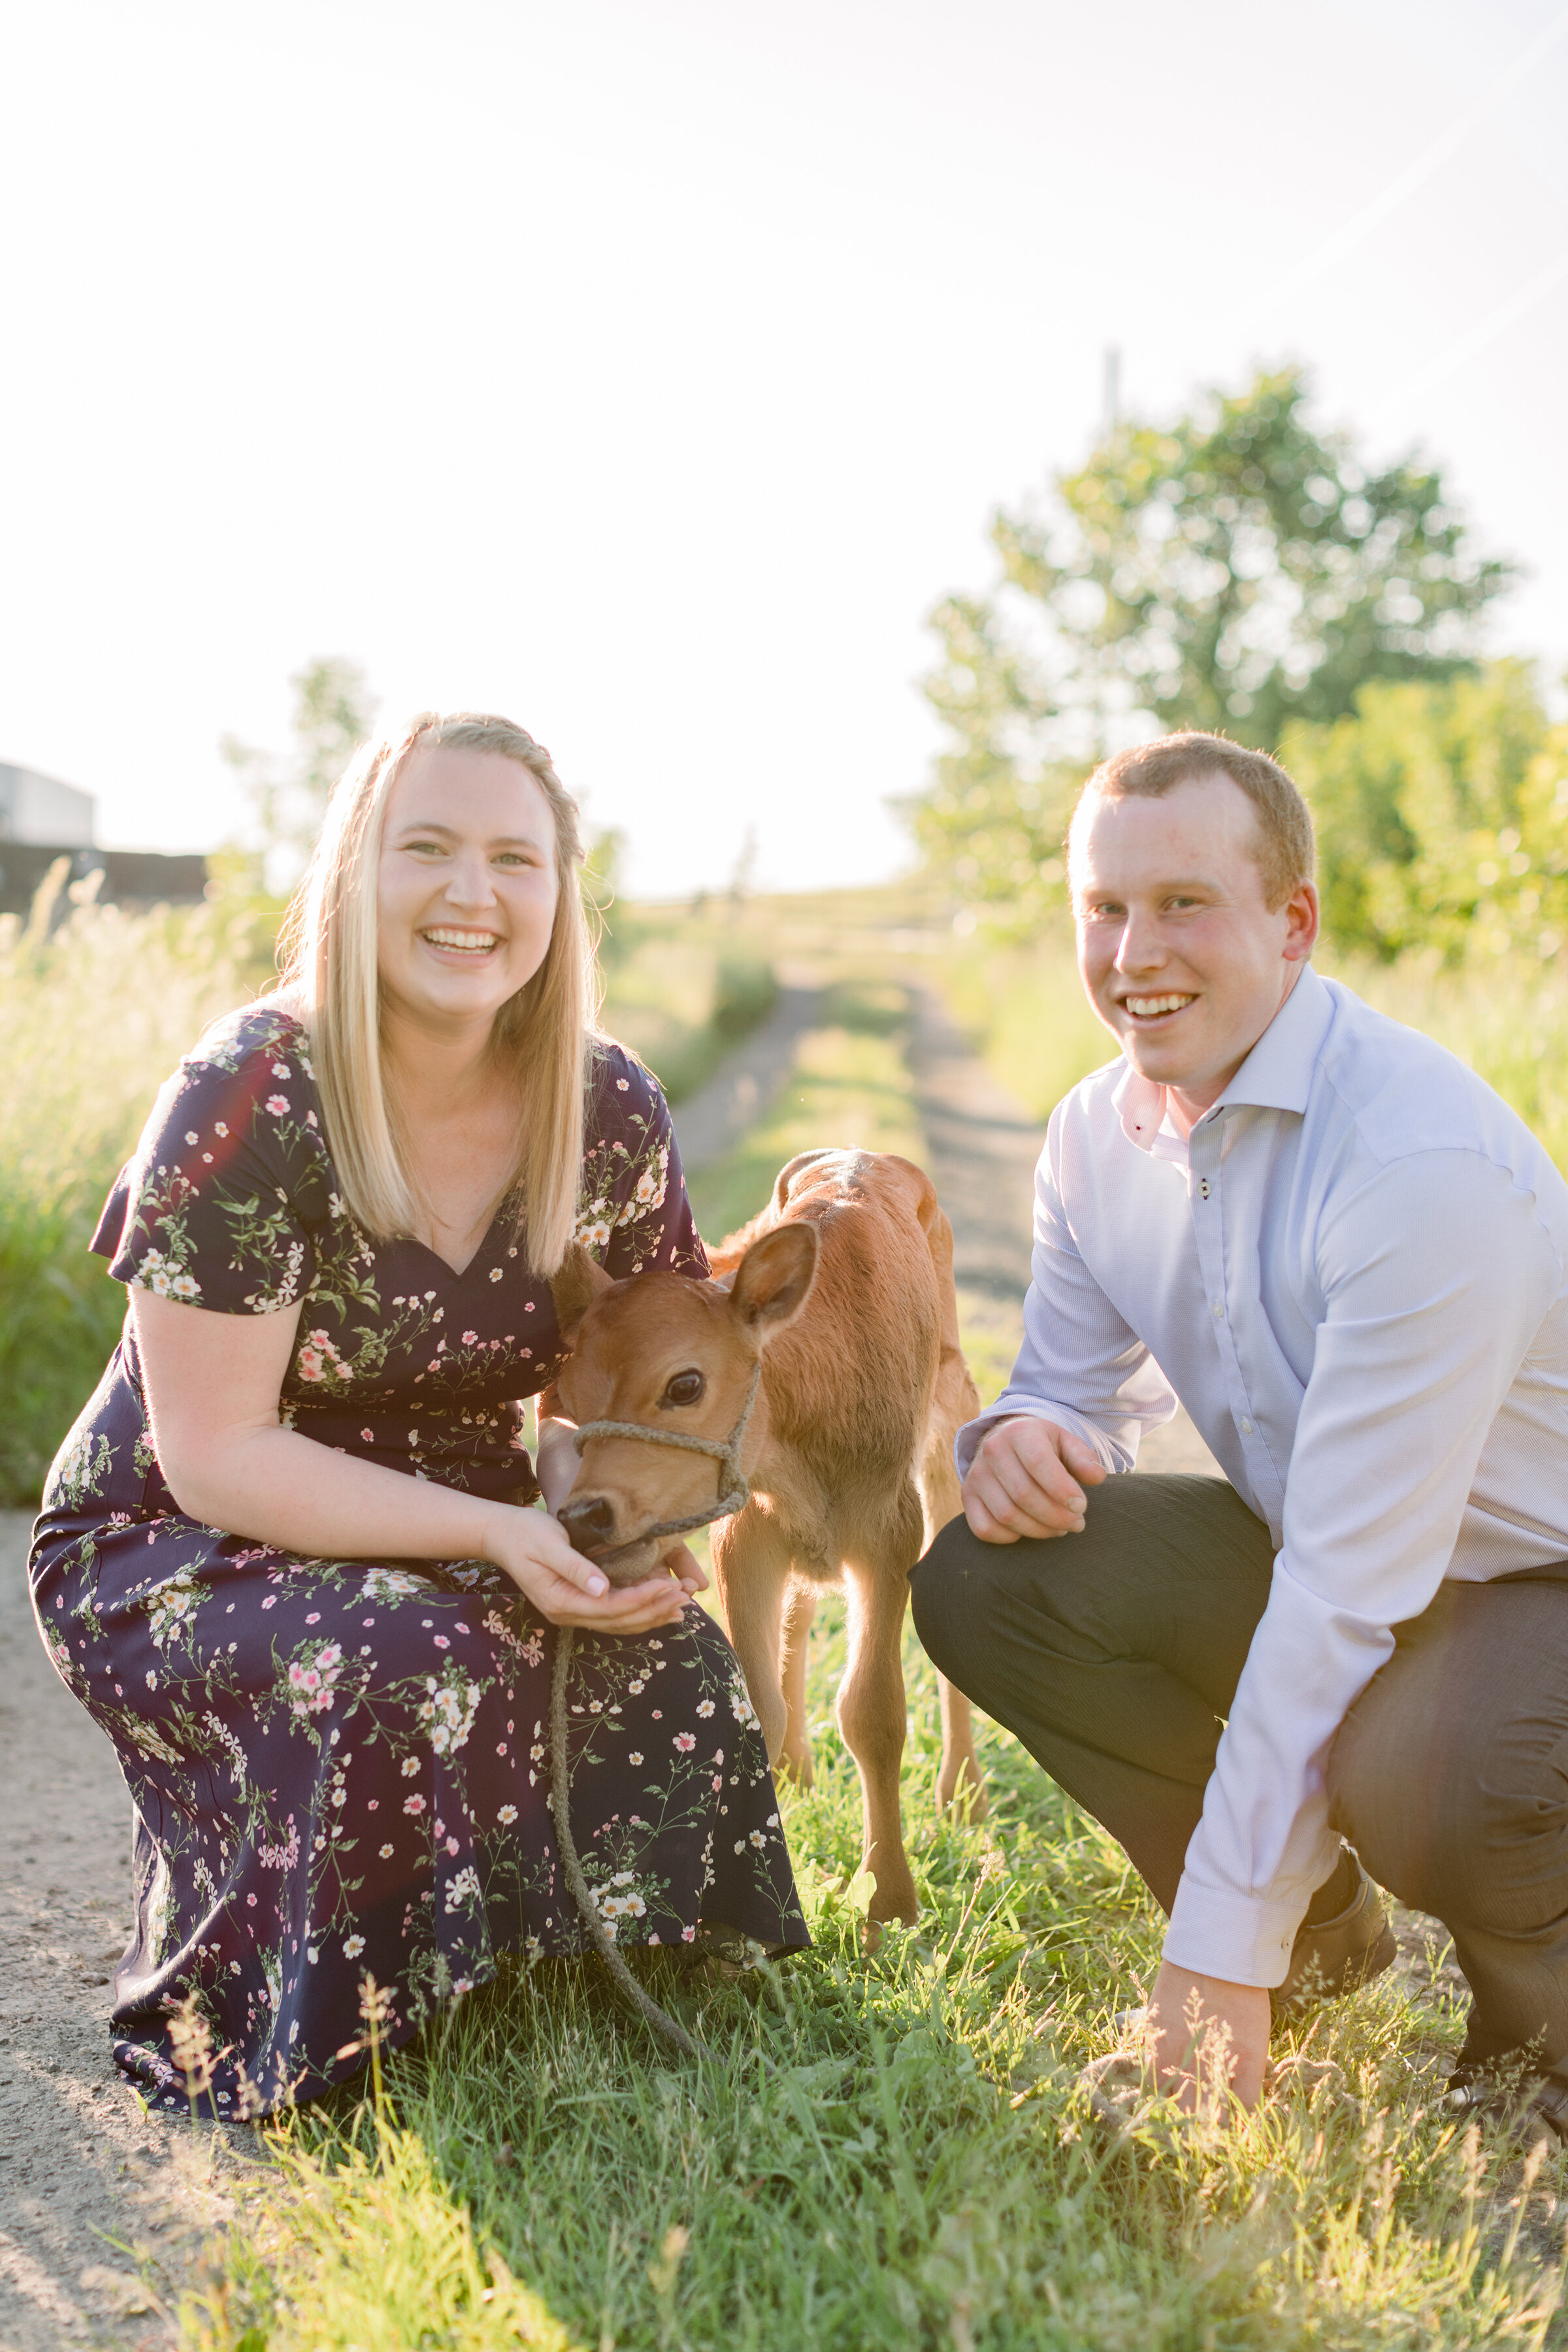  A beautiful couple feed a calf in a bright and airy engagement session on the farm. Country engagement session inspiration ideas and goals couple goals outdoor engagement session photo shoot with animals inspiration semi formal client attire inspira